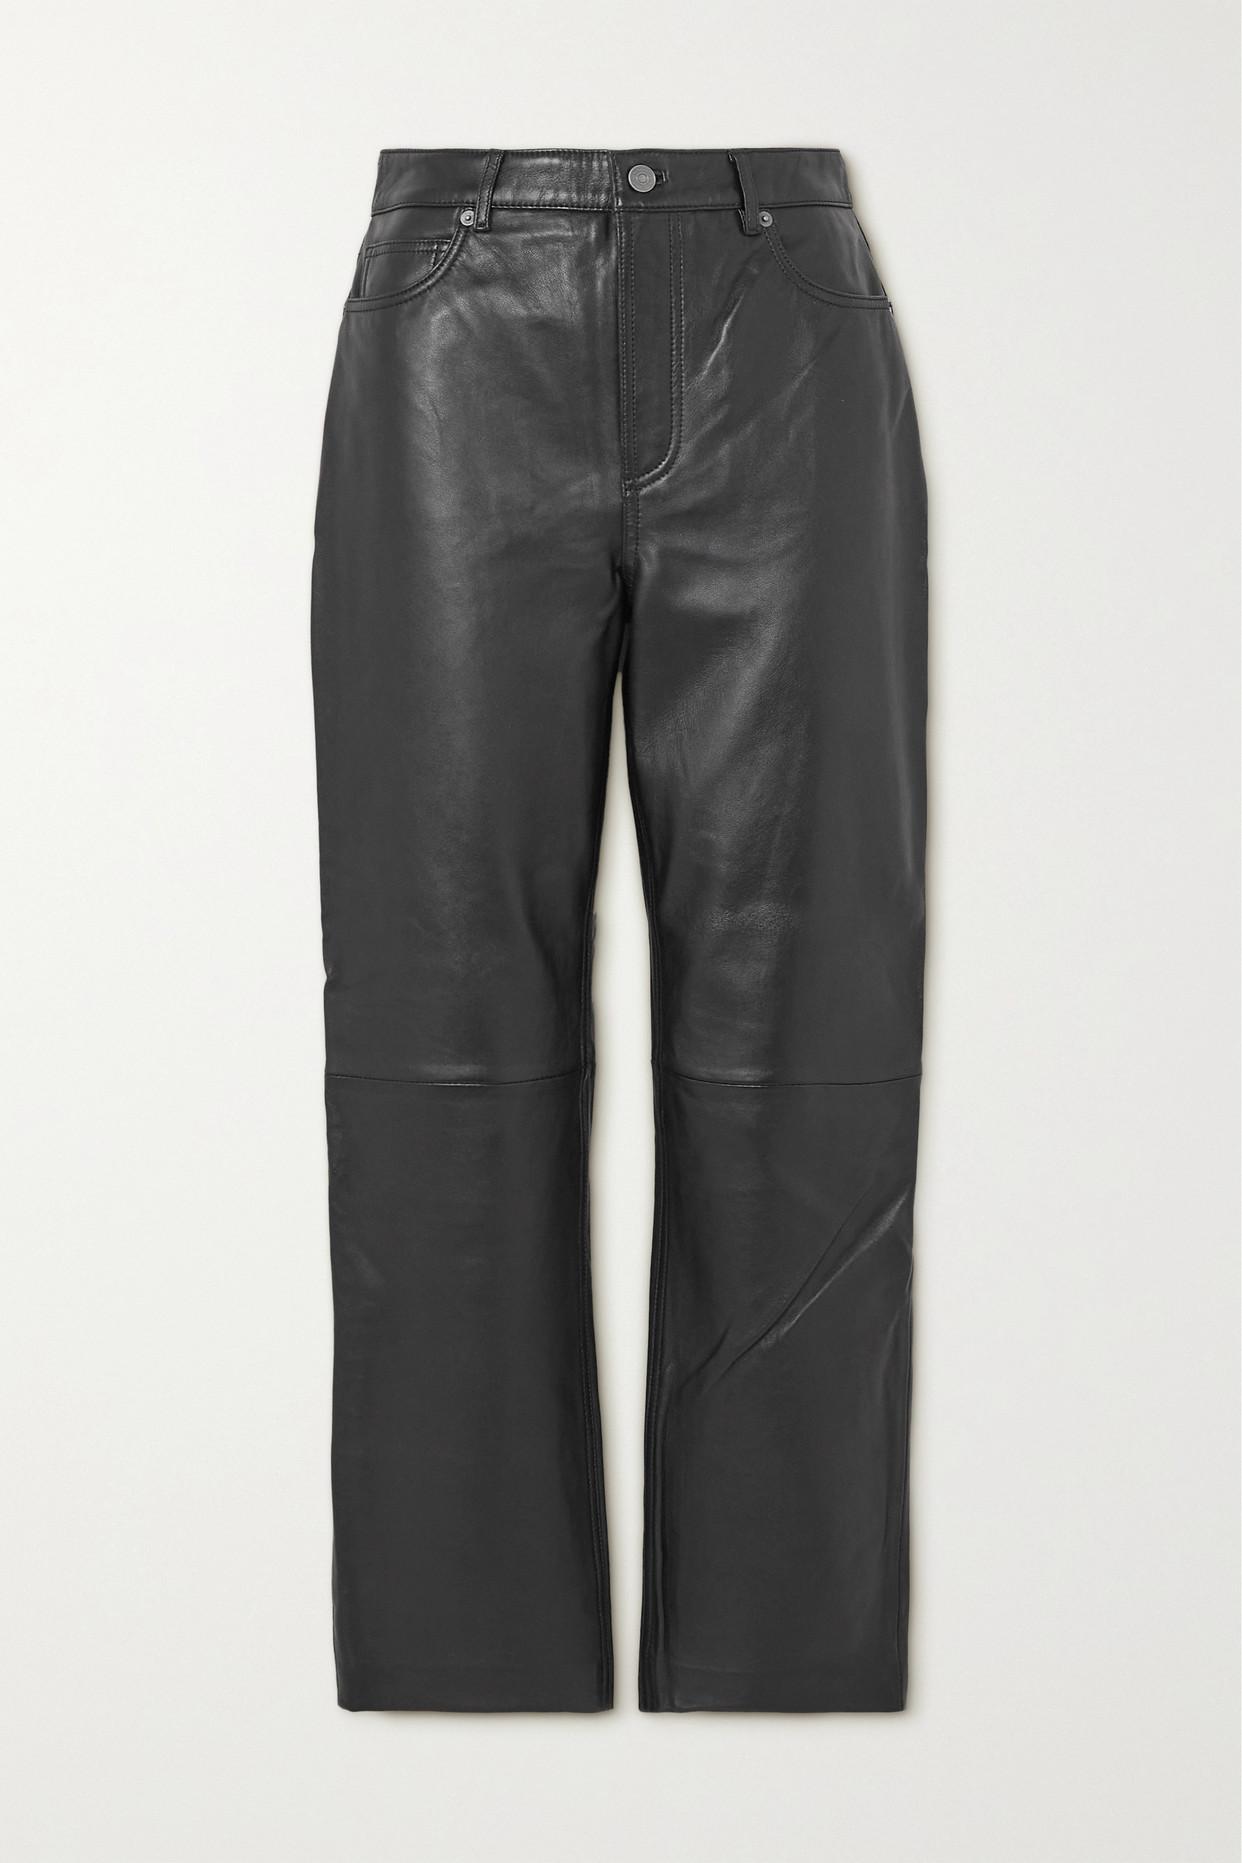 Reformation Veda Cynthia Leather Straight-leg Pants in Gray | Lyst